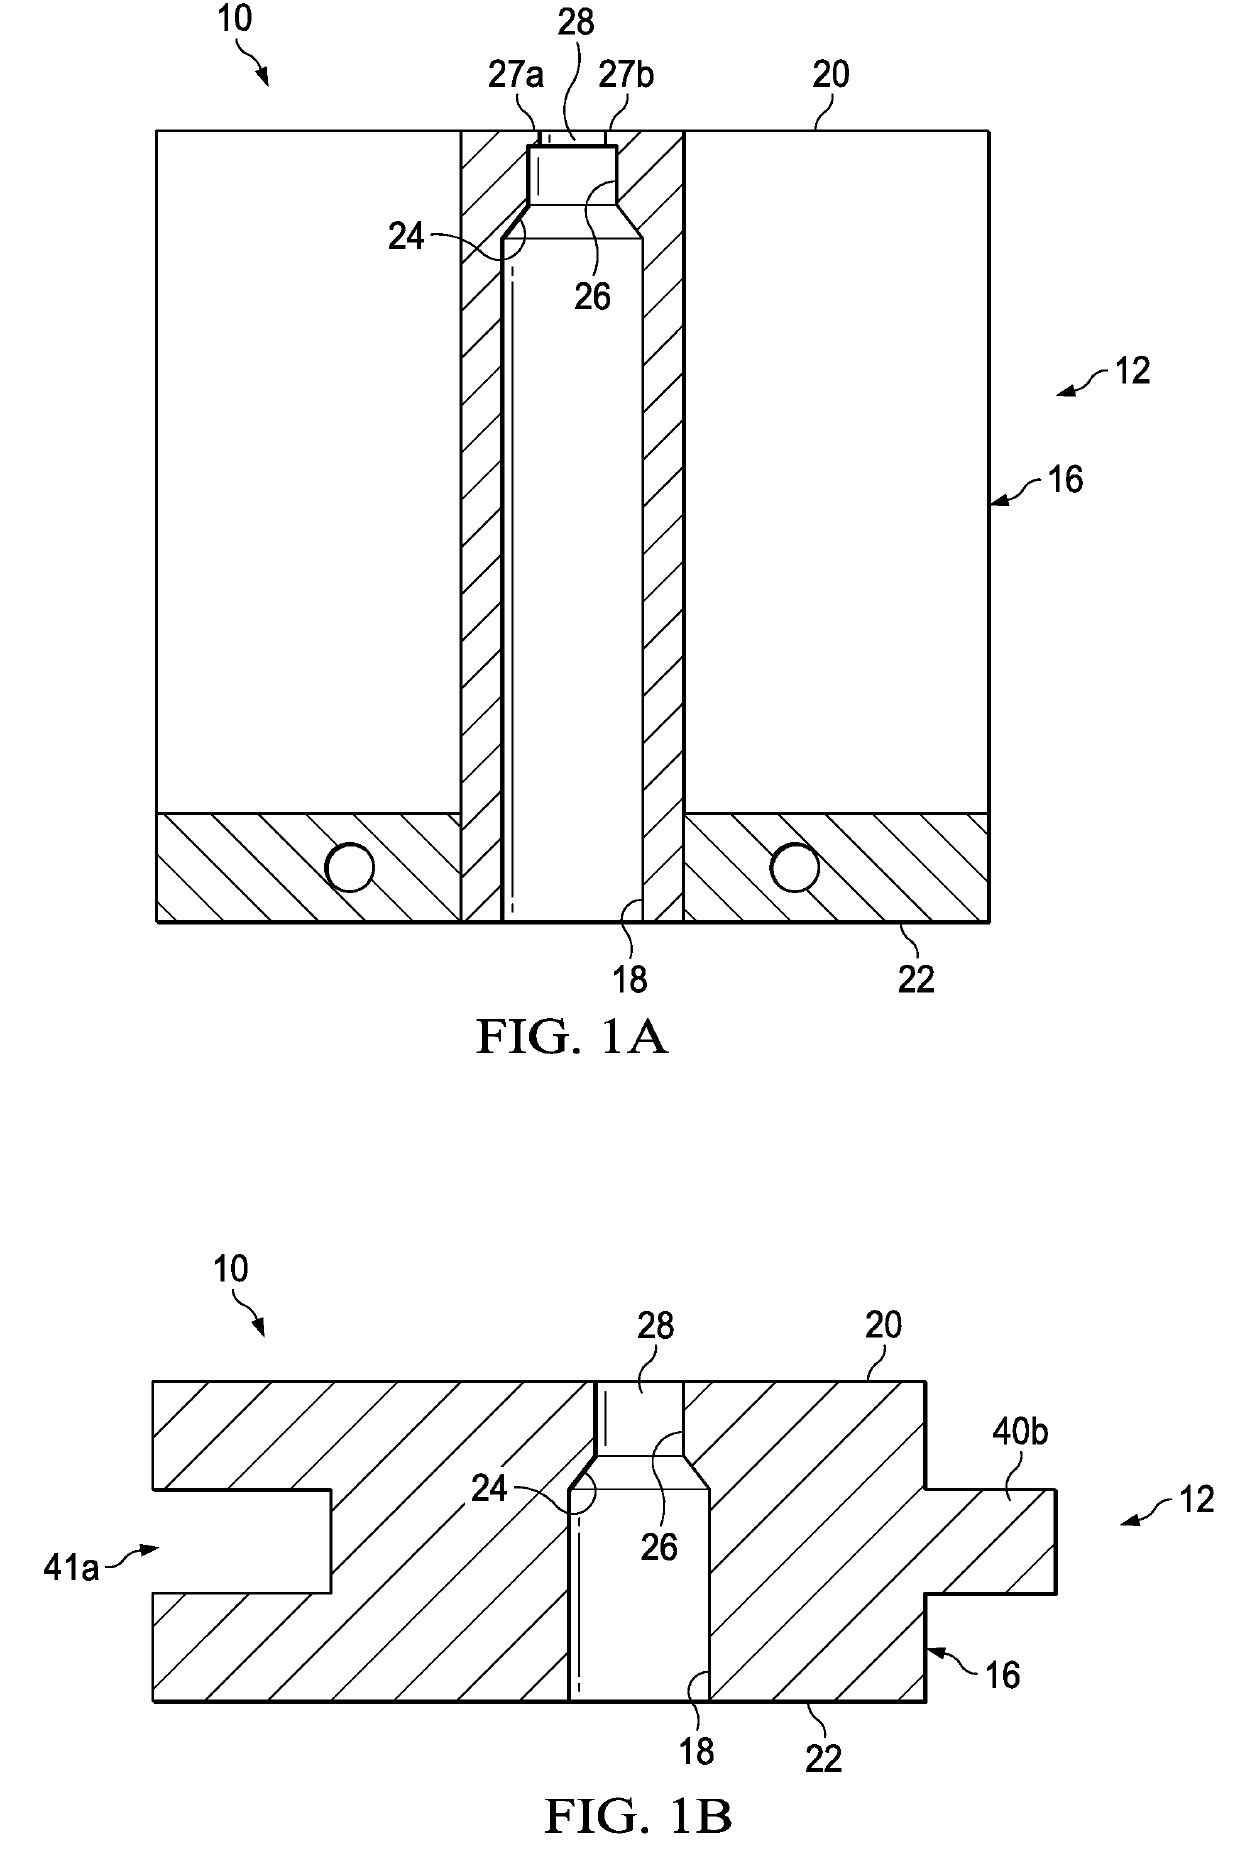 Device and Method of Determining the Force Required to Remove a Projectile from an Ammunition Cartridge